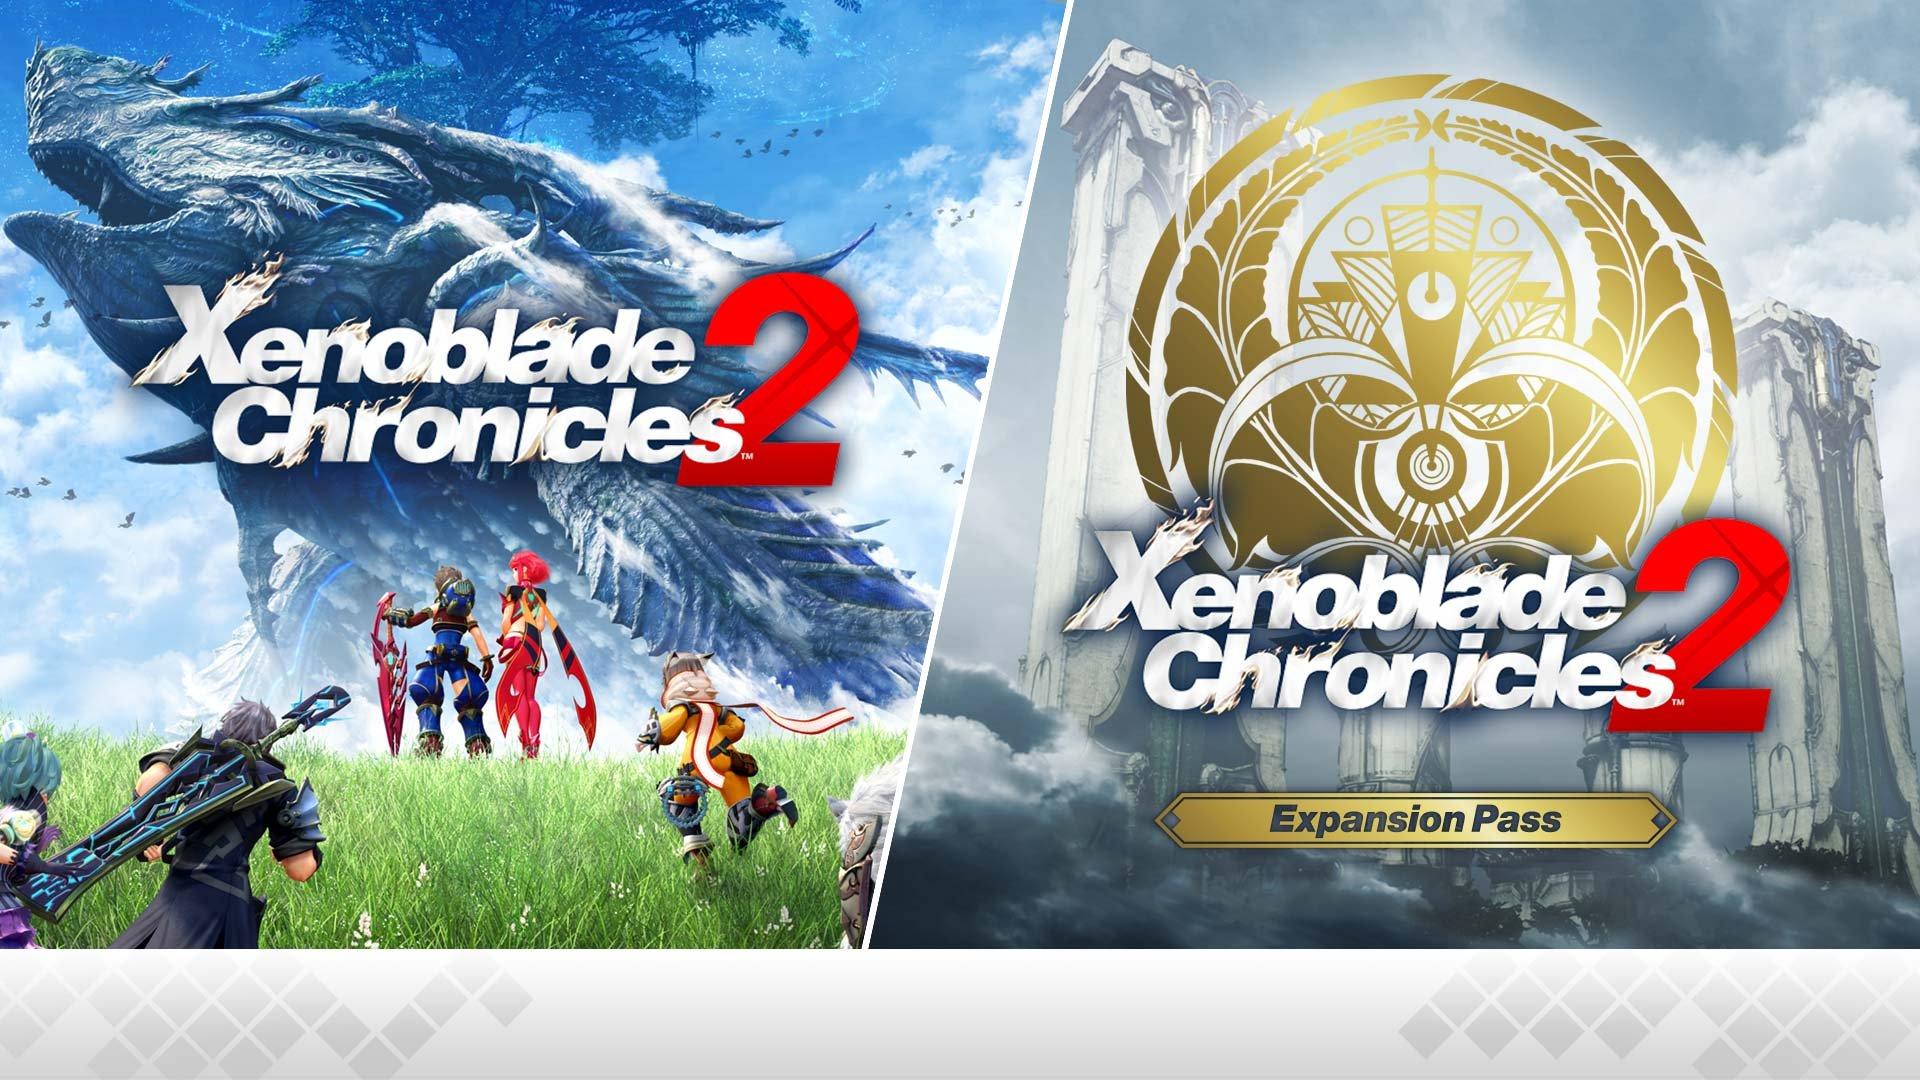 Xenoblade Chronicles 2 and Expansion Pass DLC Bundle - Nintendo Switch